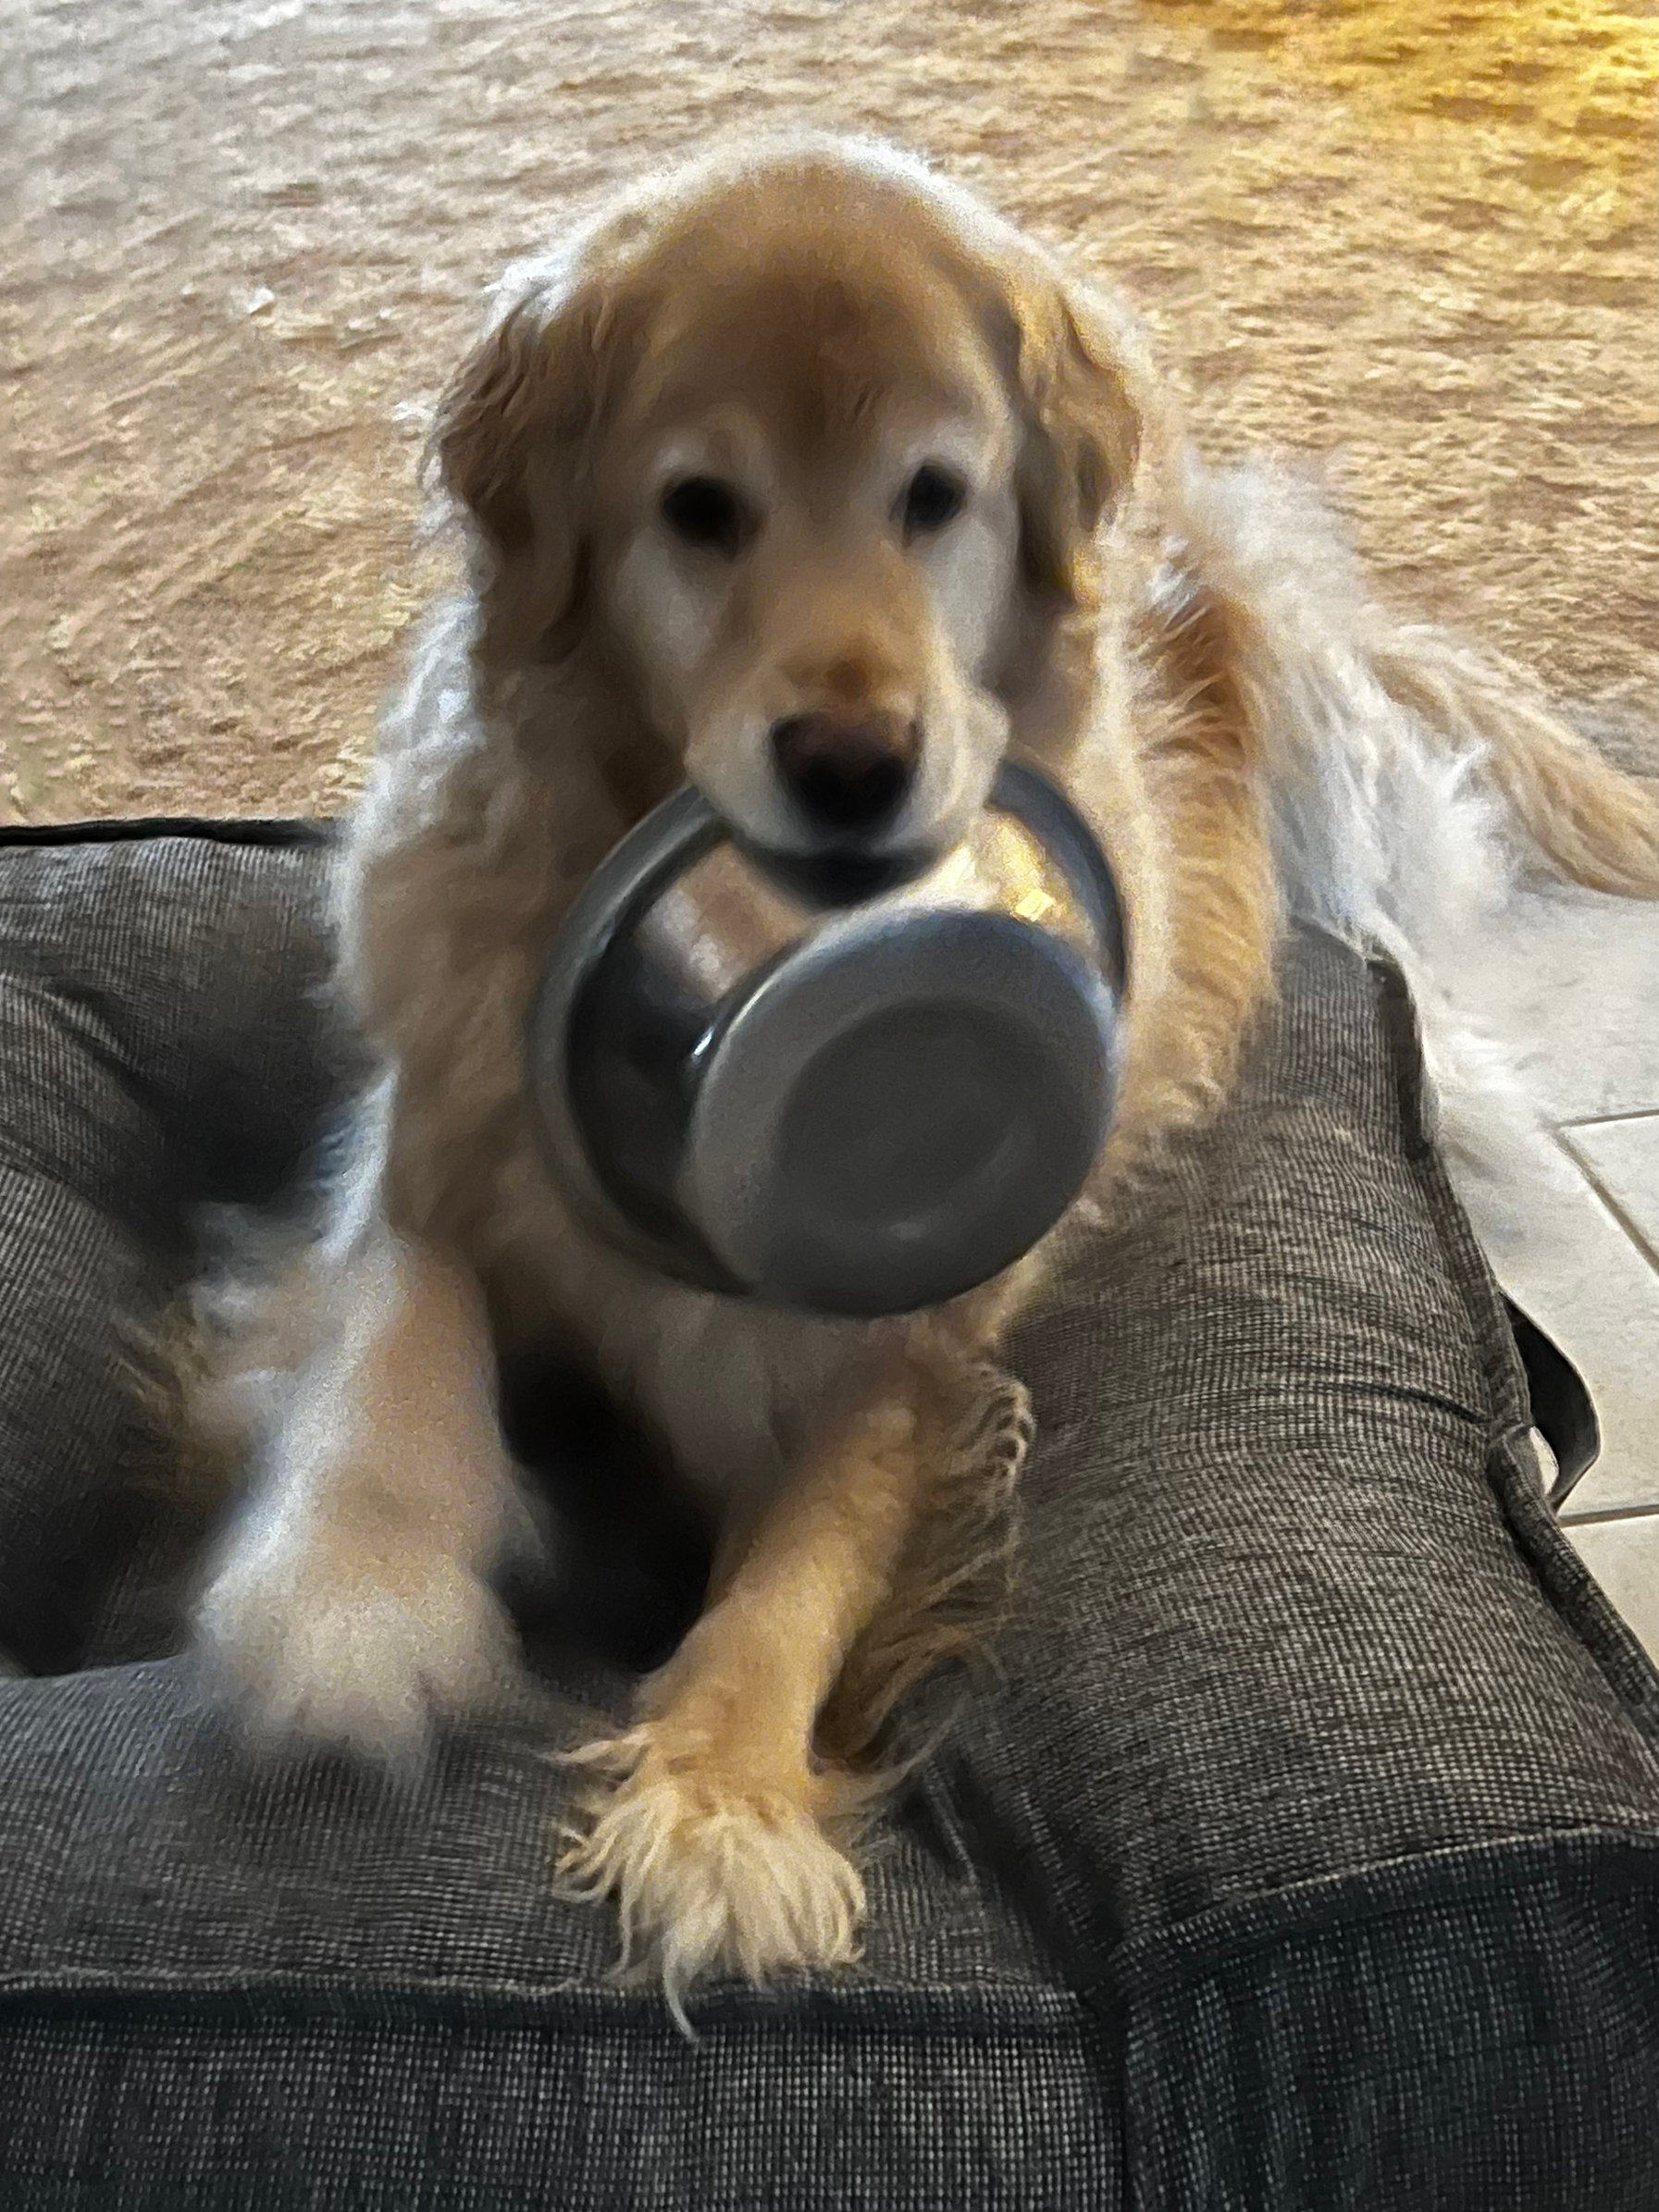 Golden Retriever holding his food bowl in his mouth